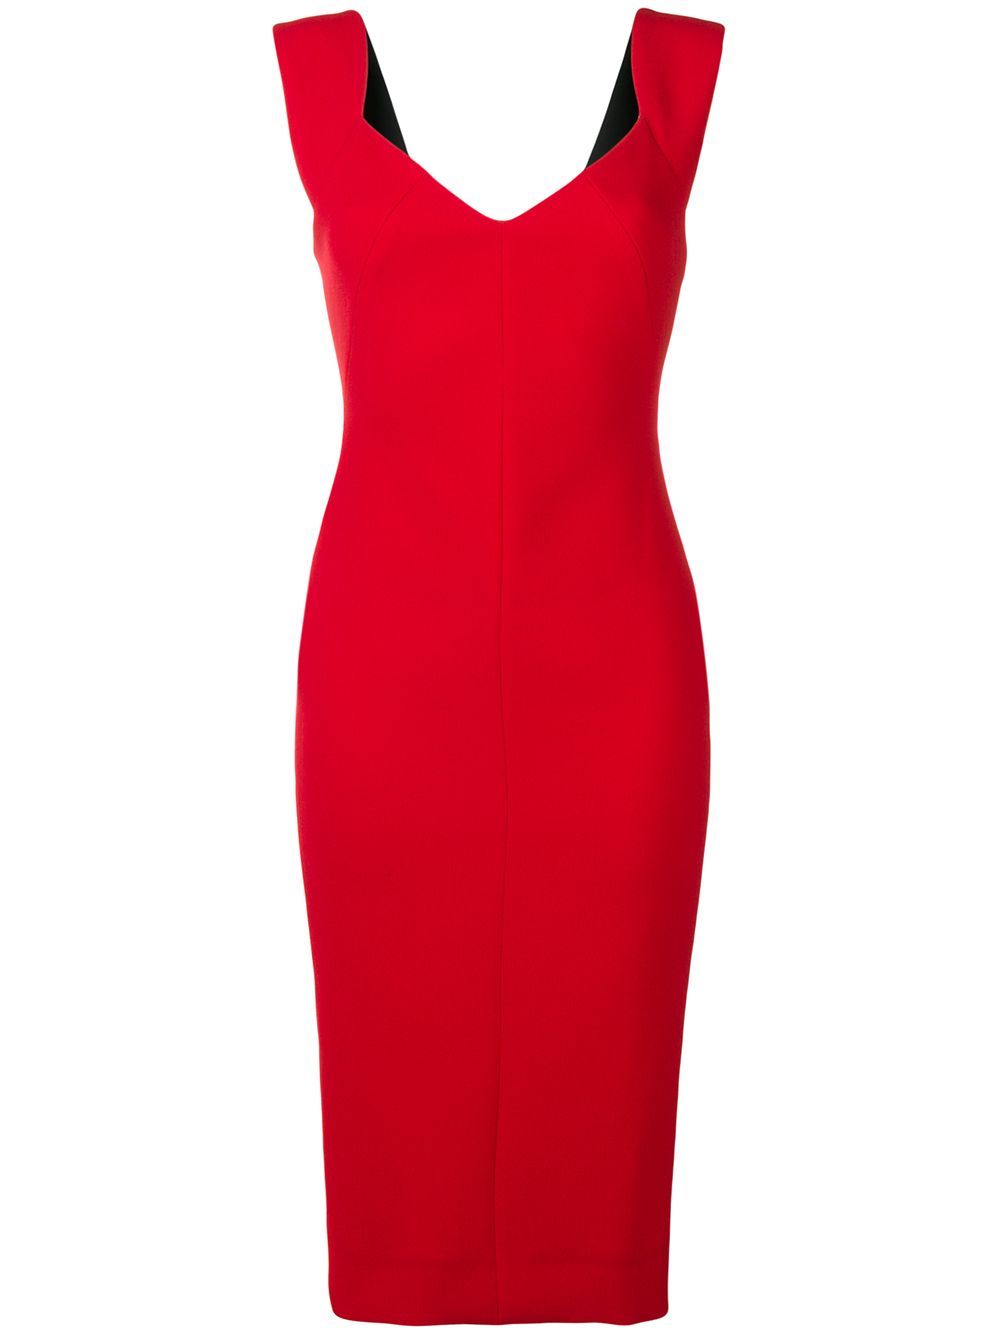 Victoria Beckham fitted sleeveless dress - Red | FarFetch Global